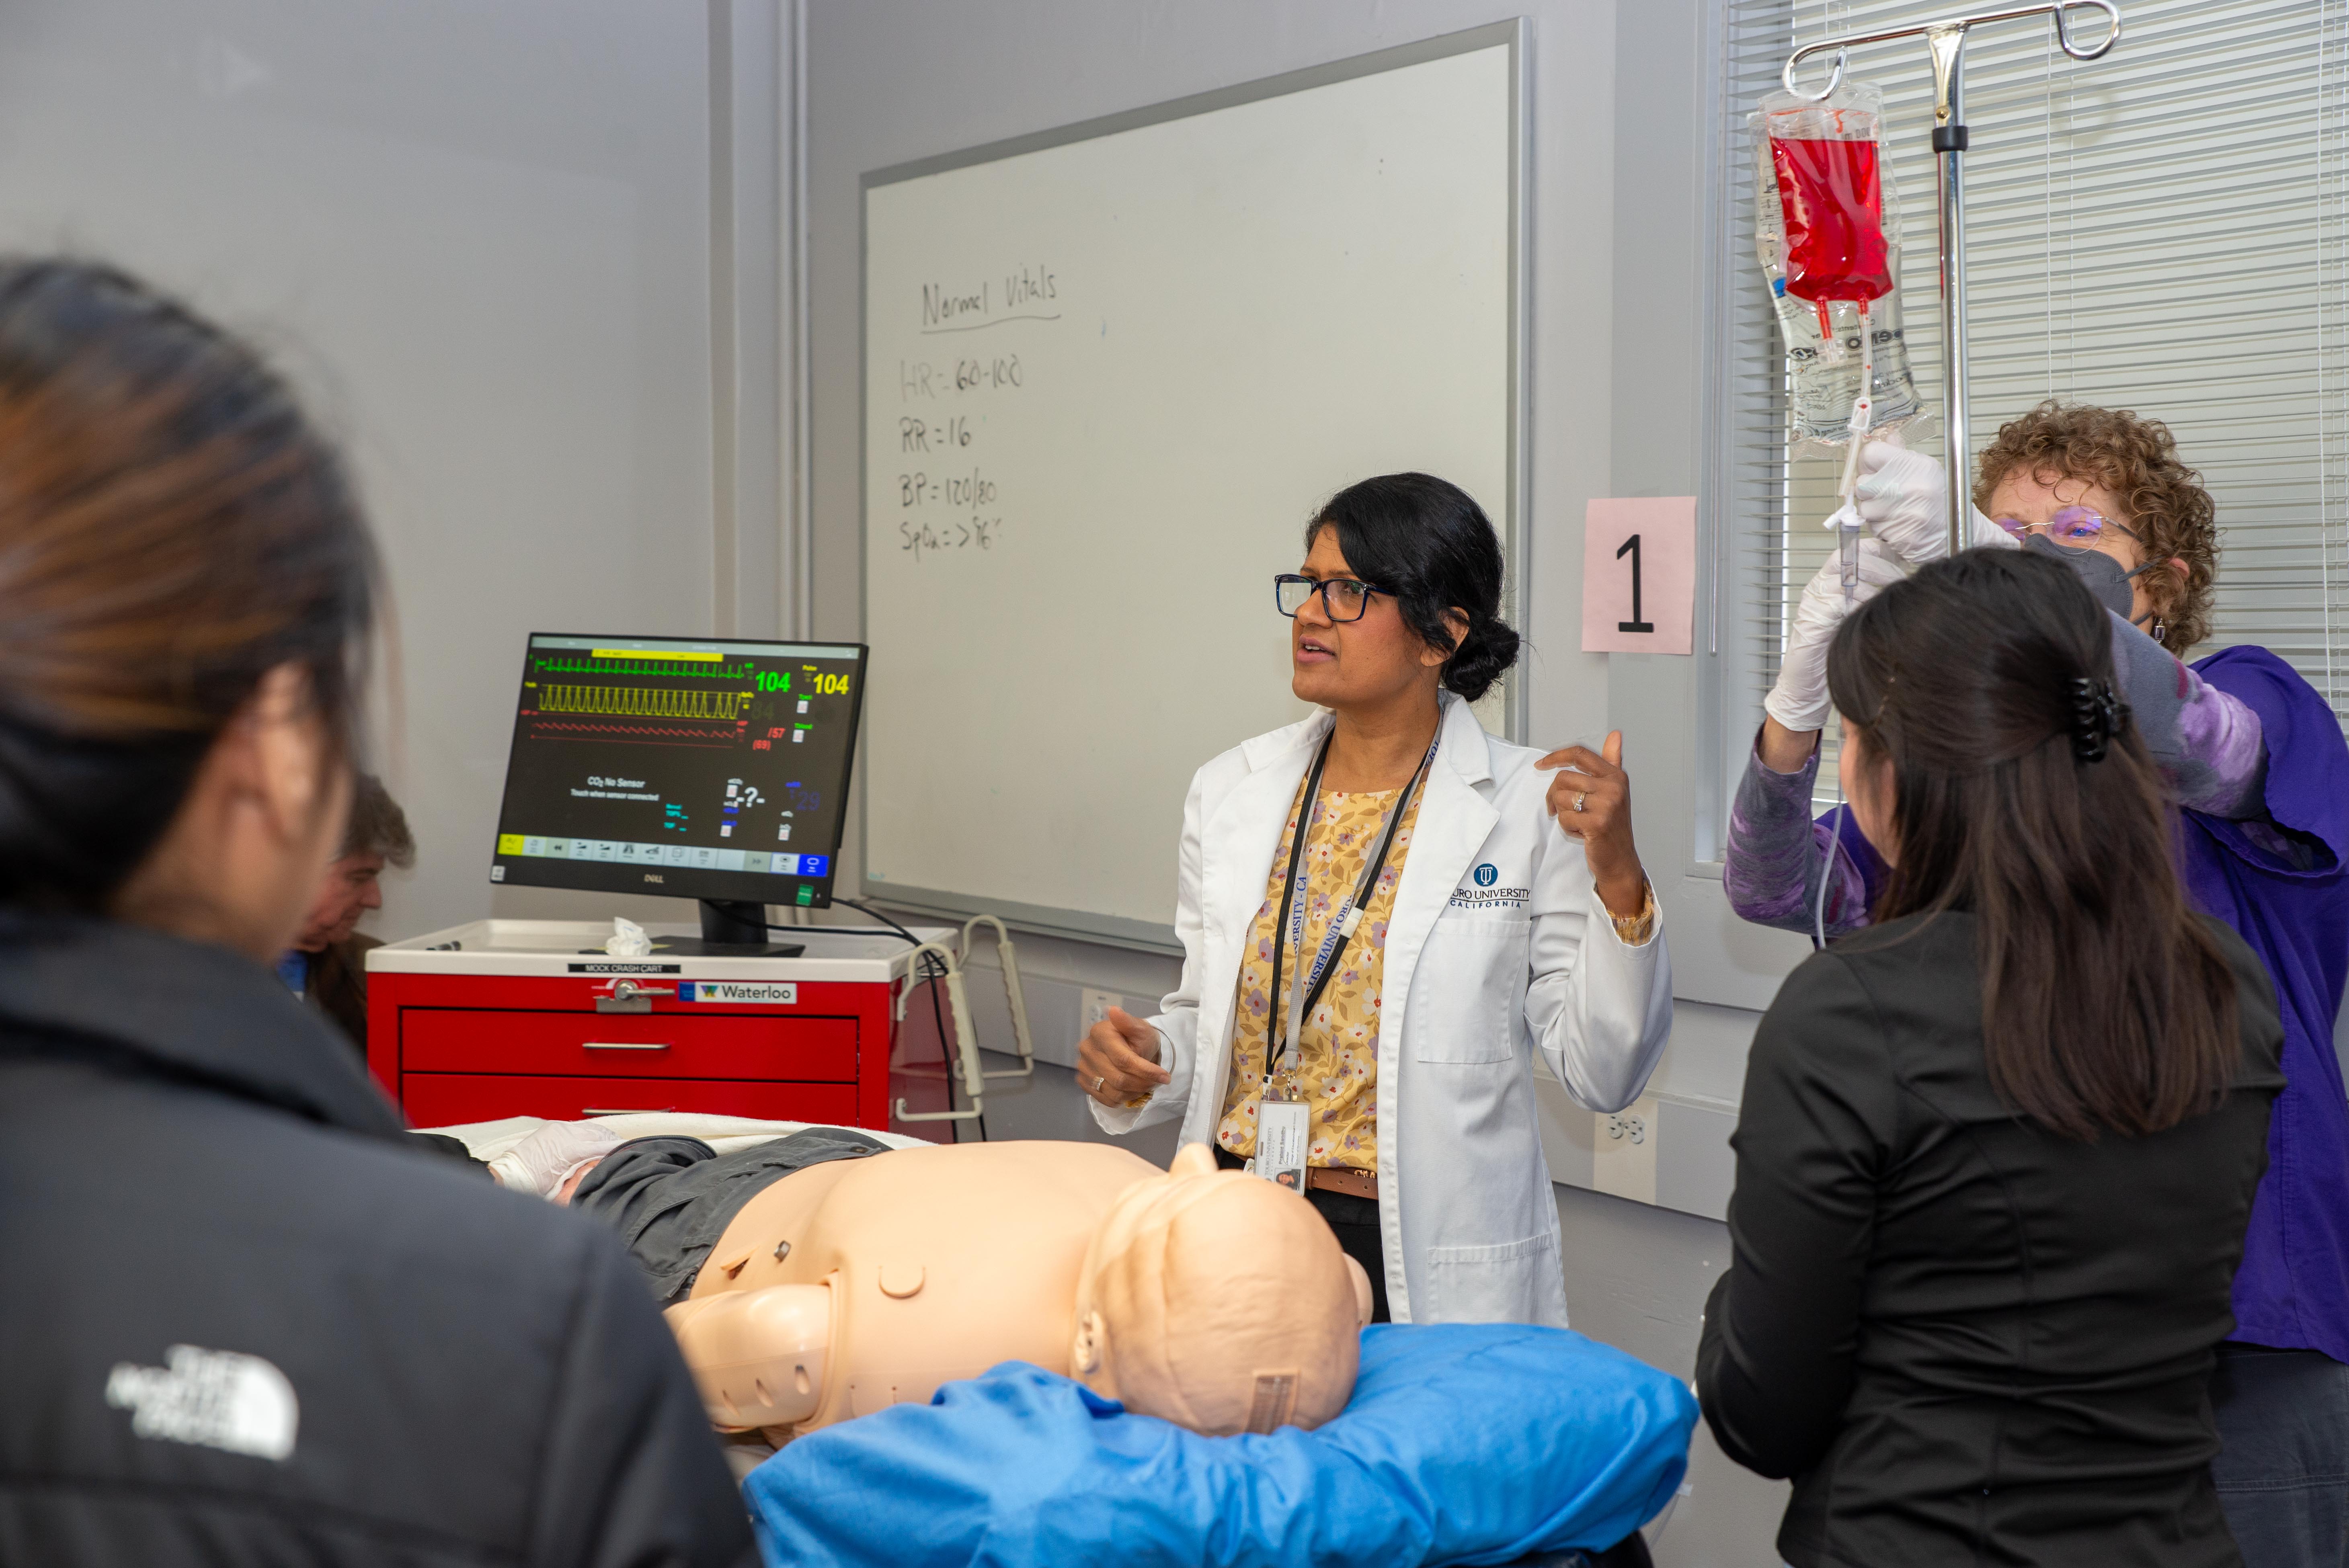 Dr. Prabjot Sandhu, Assistant Dean of the Director School of Nursing demonstrates vitals and medical procedures to students with a simulator mannequin 